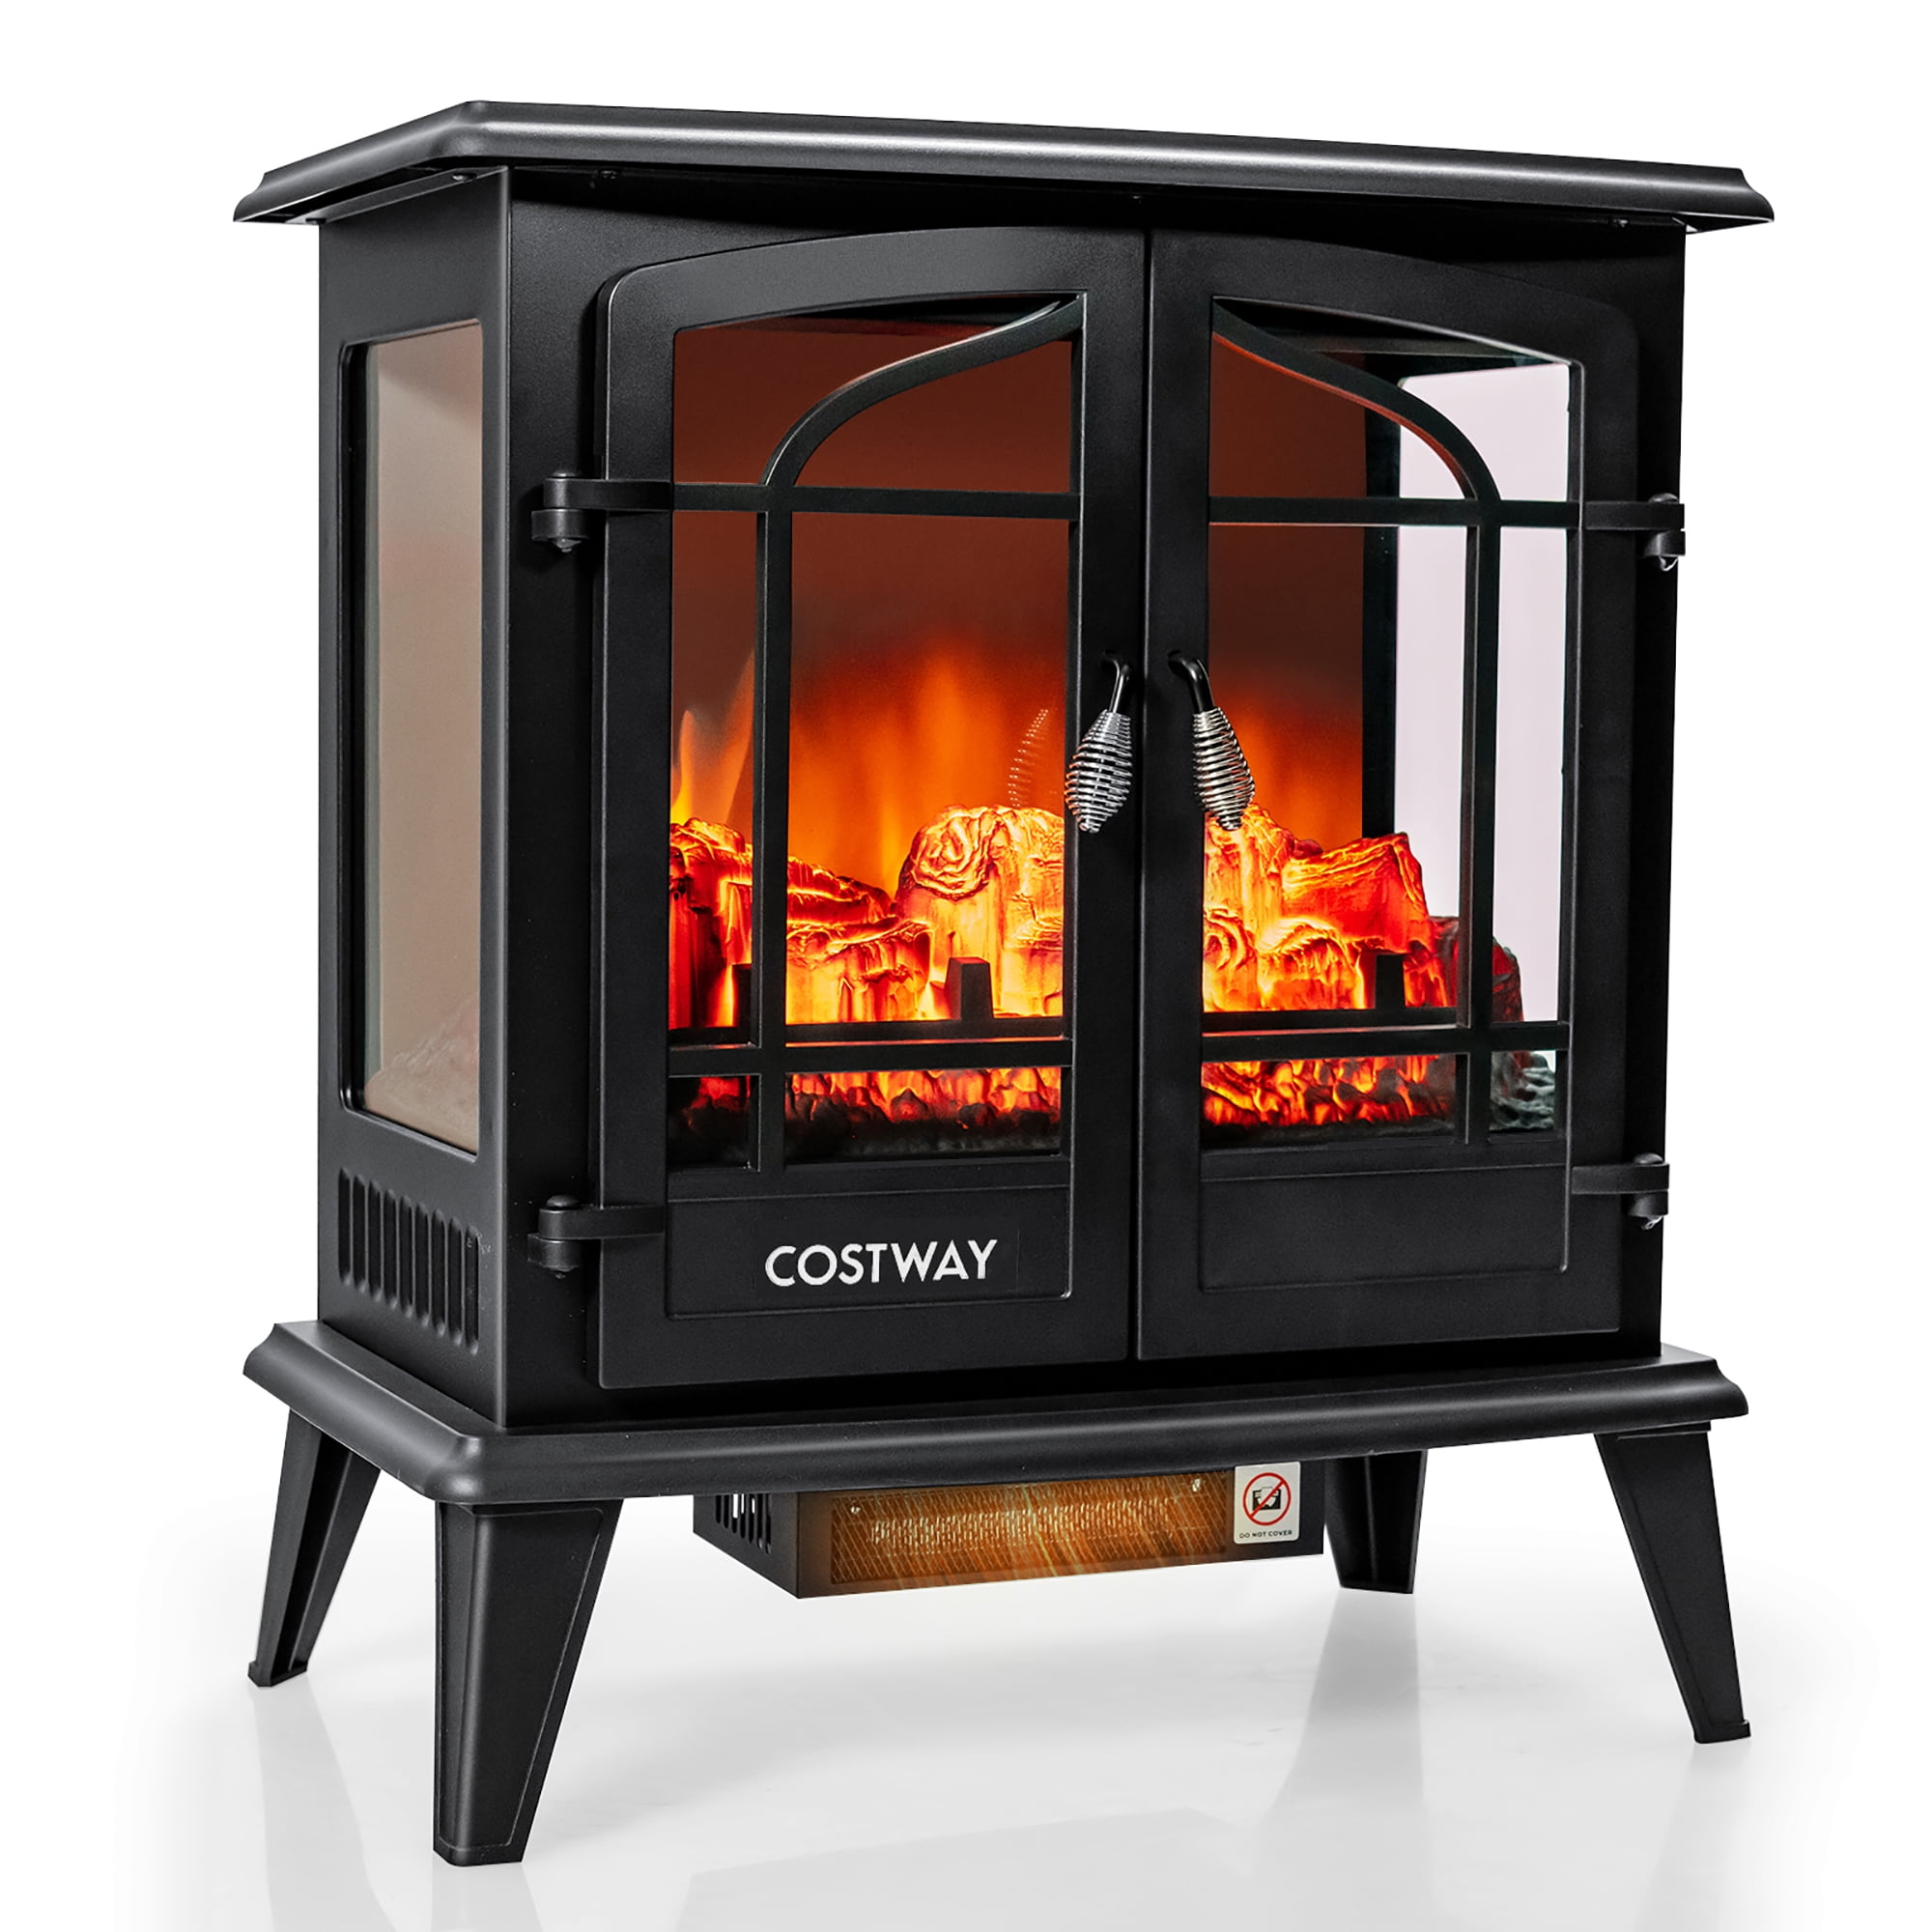  Classic Electric Fireplace - Freestanding Indoor Wood Stove  Heater for Living Rooms, Bedrooms, and Areas Up to 400-Square-Feet by  Northwest (Black) : Home & Kitchen